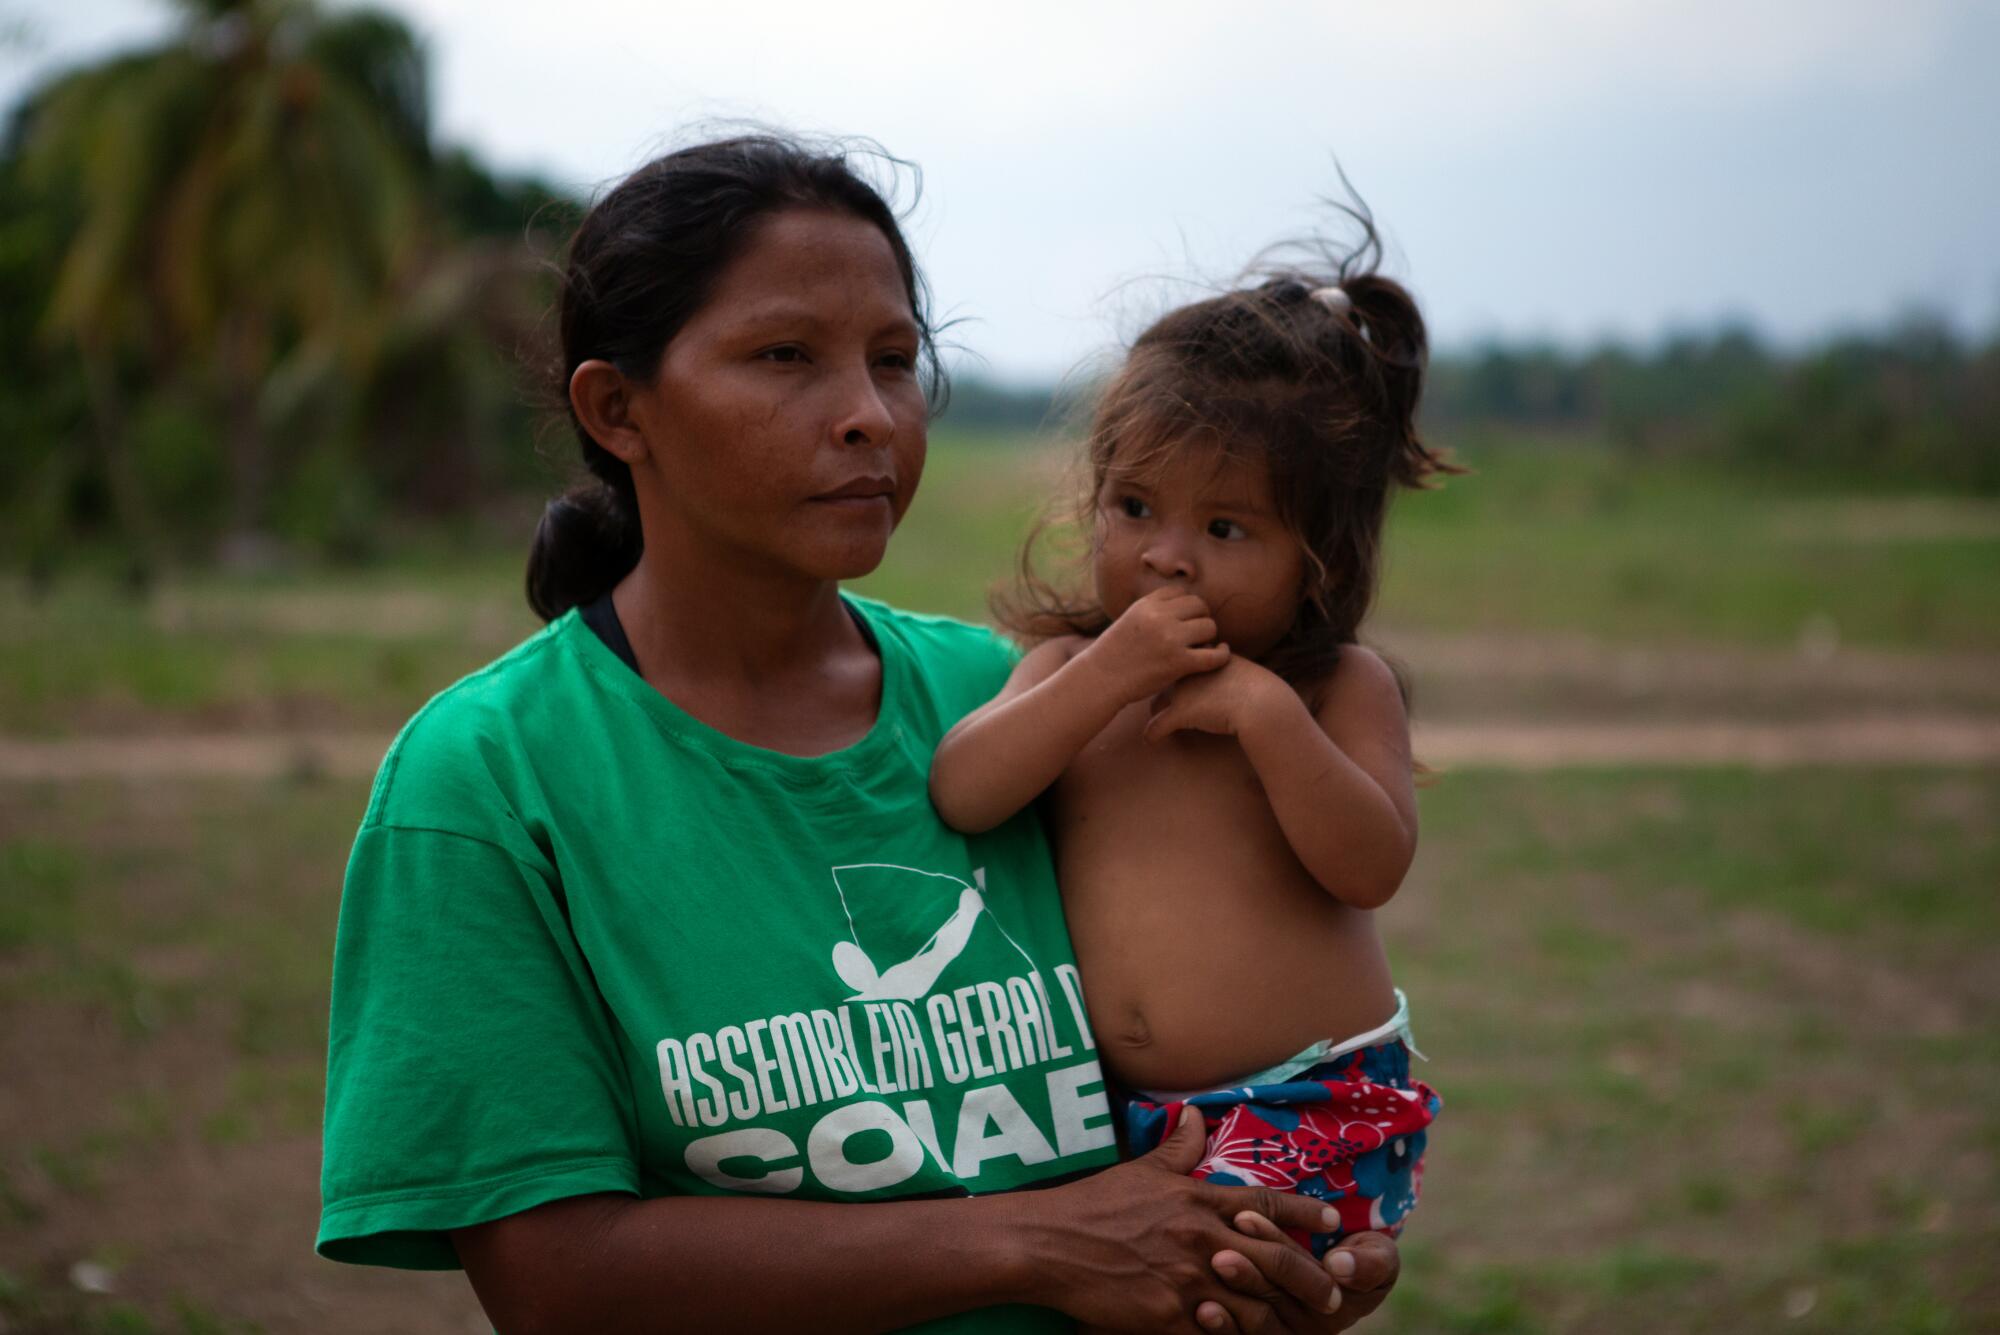 A woman with dark hair and a green T-shirt holds a young girl 